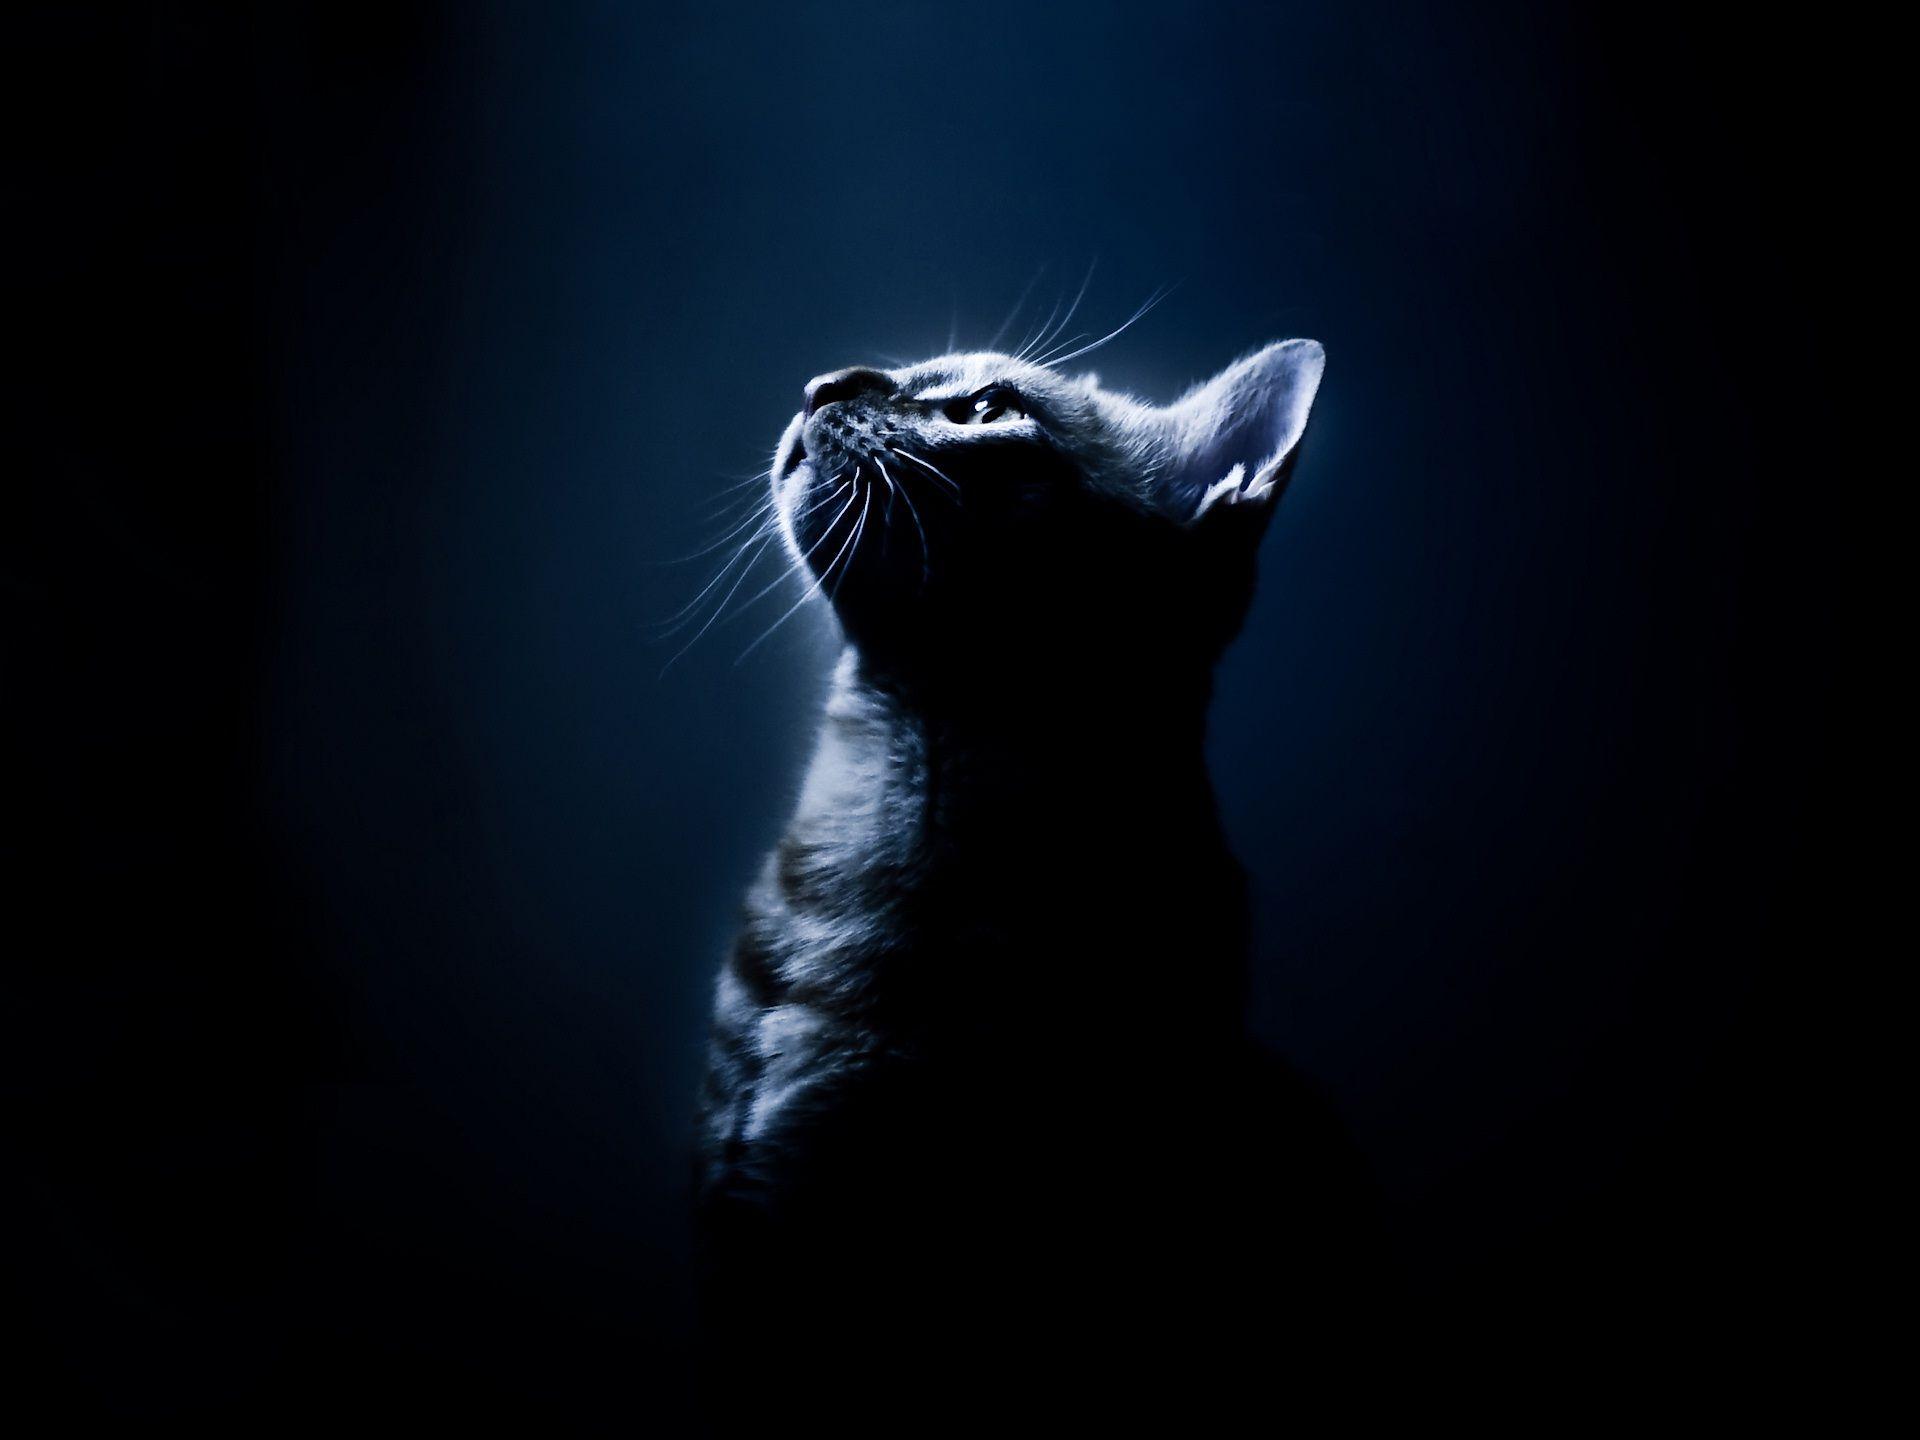 Feeling lonely and sad cat HD wallpaperNew HD wallpaper